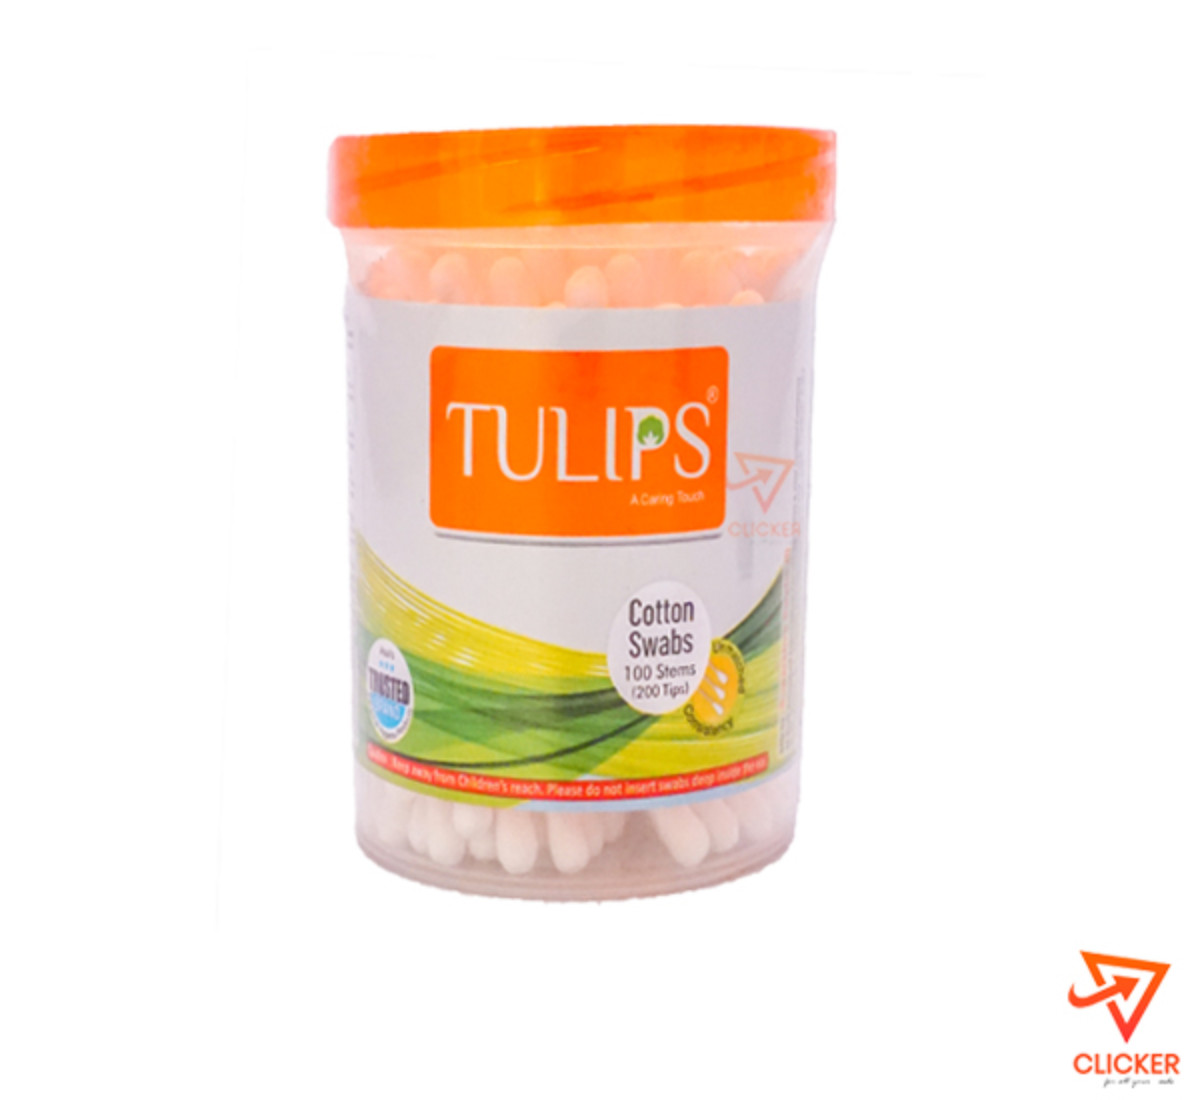 Clicker product 100 Stems TULIPS Cotton swaps 1138